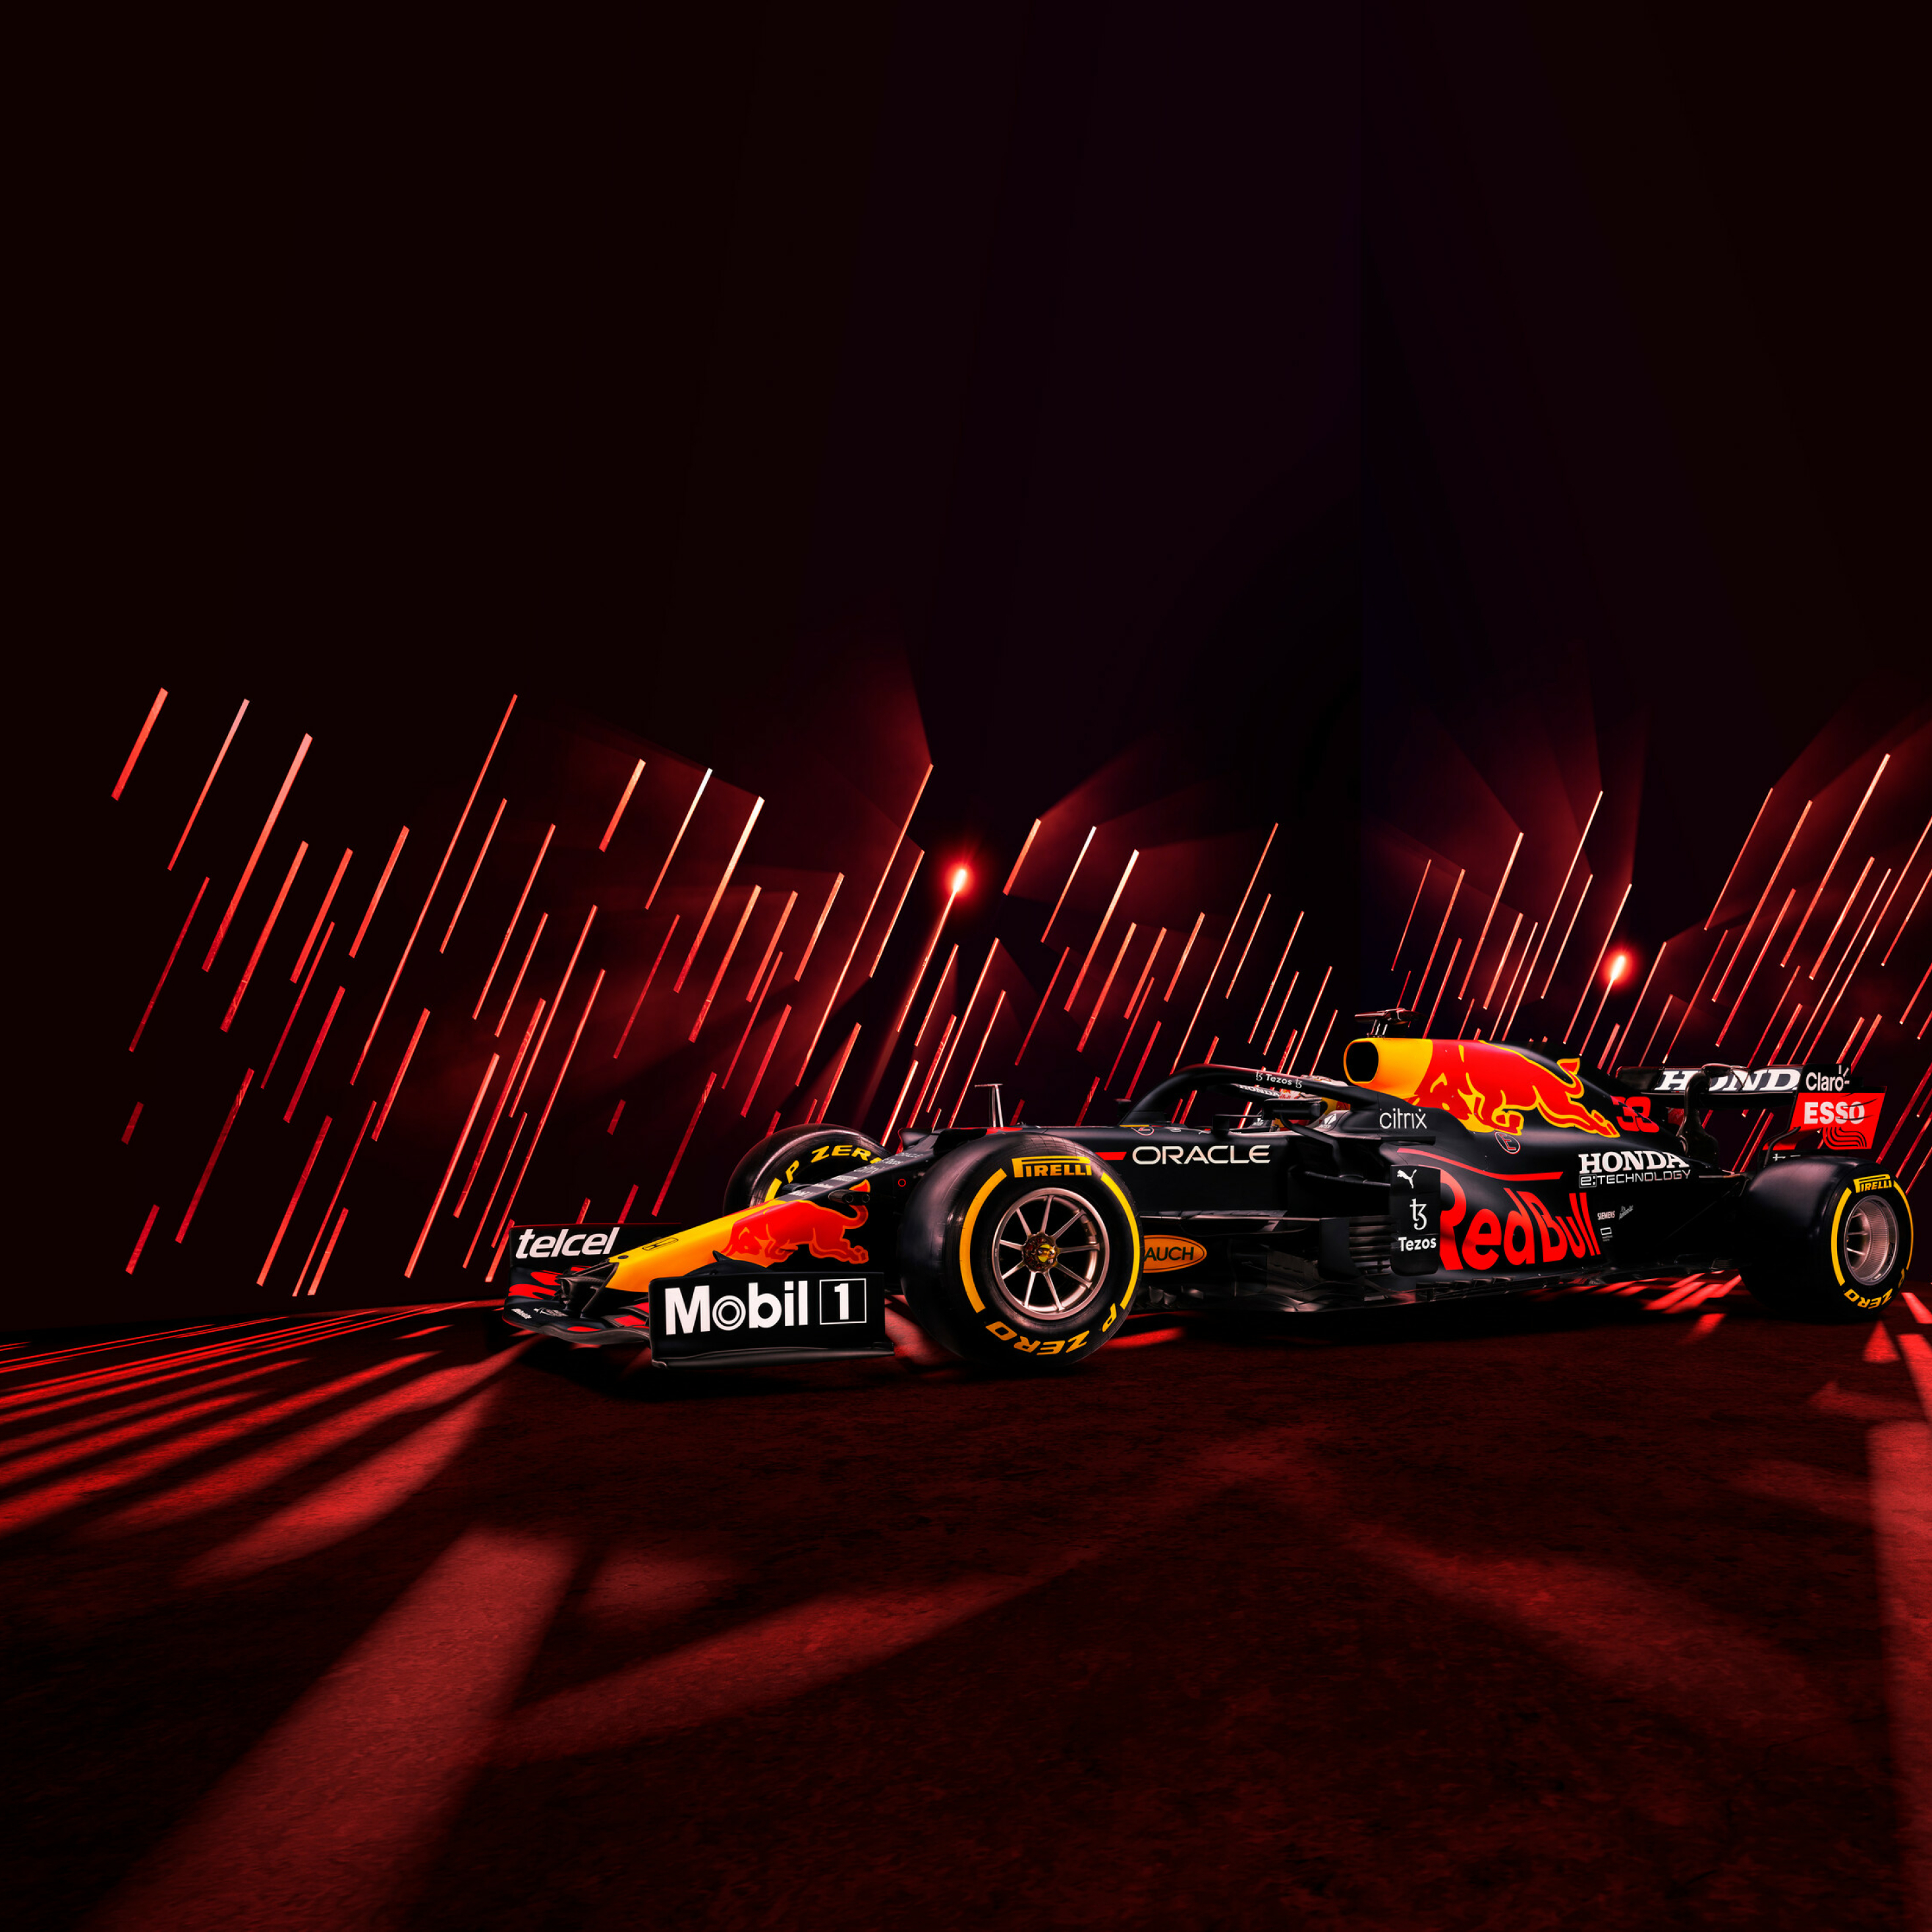 2932x2932 Red Bull Racing 22 Formula One 22 Ipad Pro Retina Display Wallpaper Hd Games 4k Wallpapers Images Photos And Background Wallpapers Den